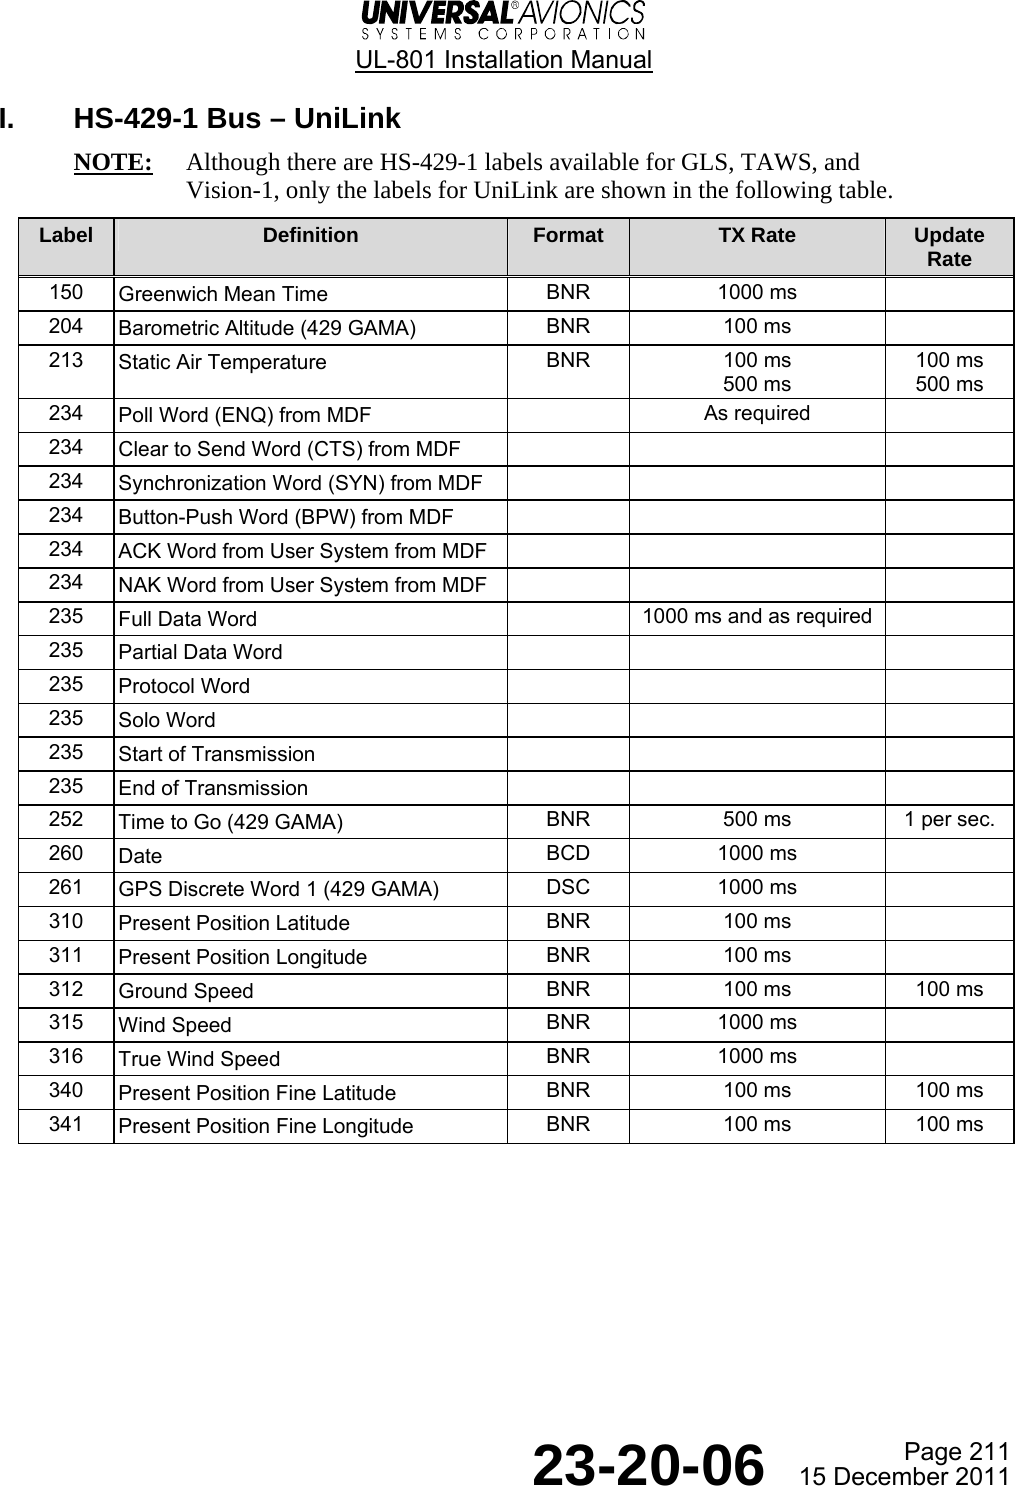  UL-801 Installation Manual  Page 211  23-20-06  15 December 2011 I.  HS-429-1 Bus – UniLink NOTE:  Although there are HS-429-1 labels available for GLS, TAWS, and Vision-1, only the labels for UniLink are shown in the following table. Label  Definition  Format  TX Rate  Update Rate 150  Greenwich Mean Time  BNR 1000 ms   204  Barometric Altitude (429 GAMA)  BNR 100 ms   213  Static Air Temperature  BNR  100 ms  500 ms 100 ms  500 ms 234  Poll Word (ENQ) from MDF   As required   234  Clear to Send Word (CTS) from MDF      234  Synchronization Word (SYN) from MDF      234  Button-Push Word (BPW) from MDF      234  ACK Word from User System from MDF      234  NAK Word from User System from MDF      235  Full Data Word    1000 ms and as required   235  Partial Data Word      235  Protocol Word      235  Solo Word      235  Start of Transmission      235  End of Transmission      252  Time to Go (429 GAMA)  BNR  500 ms  1 per sec. 260  Date  BCD 1000 ms   261  GPS Discrete Word 1 (429 GAMA)  DSC 1000 ms   310  Present Position Latitude  BNR 100 ms   311  Present Position Longitude  BNR 100 ms   312  Ground Speed  BNR  100 ms  100 ms 315  Wind Speed  BNR 1000 ms   316  True Wind Speed  BNR 1000 ms   340  Present Position Fine Latitude  BNR  100 ms  100 ms 341  Present Position Fine Longitude  BNR  100 ms  100 ms  